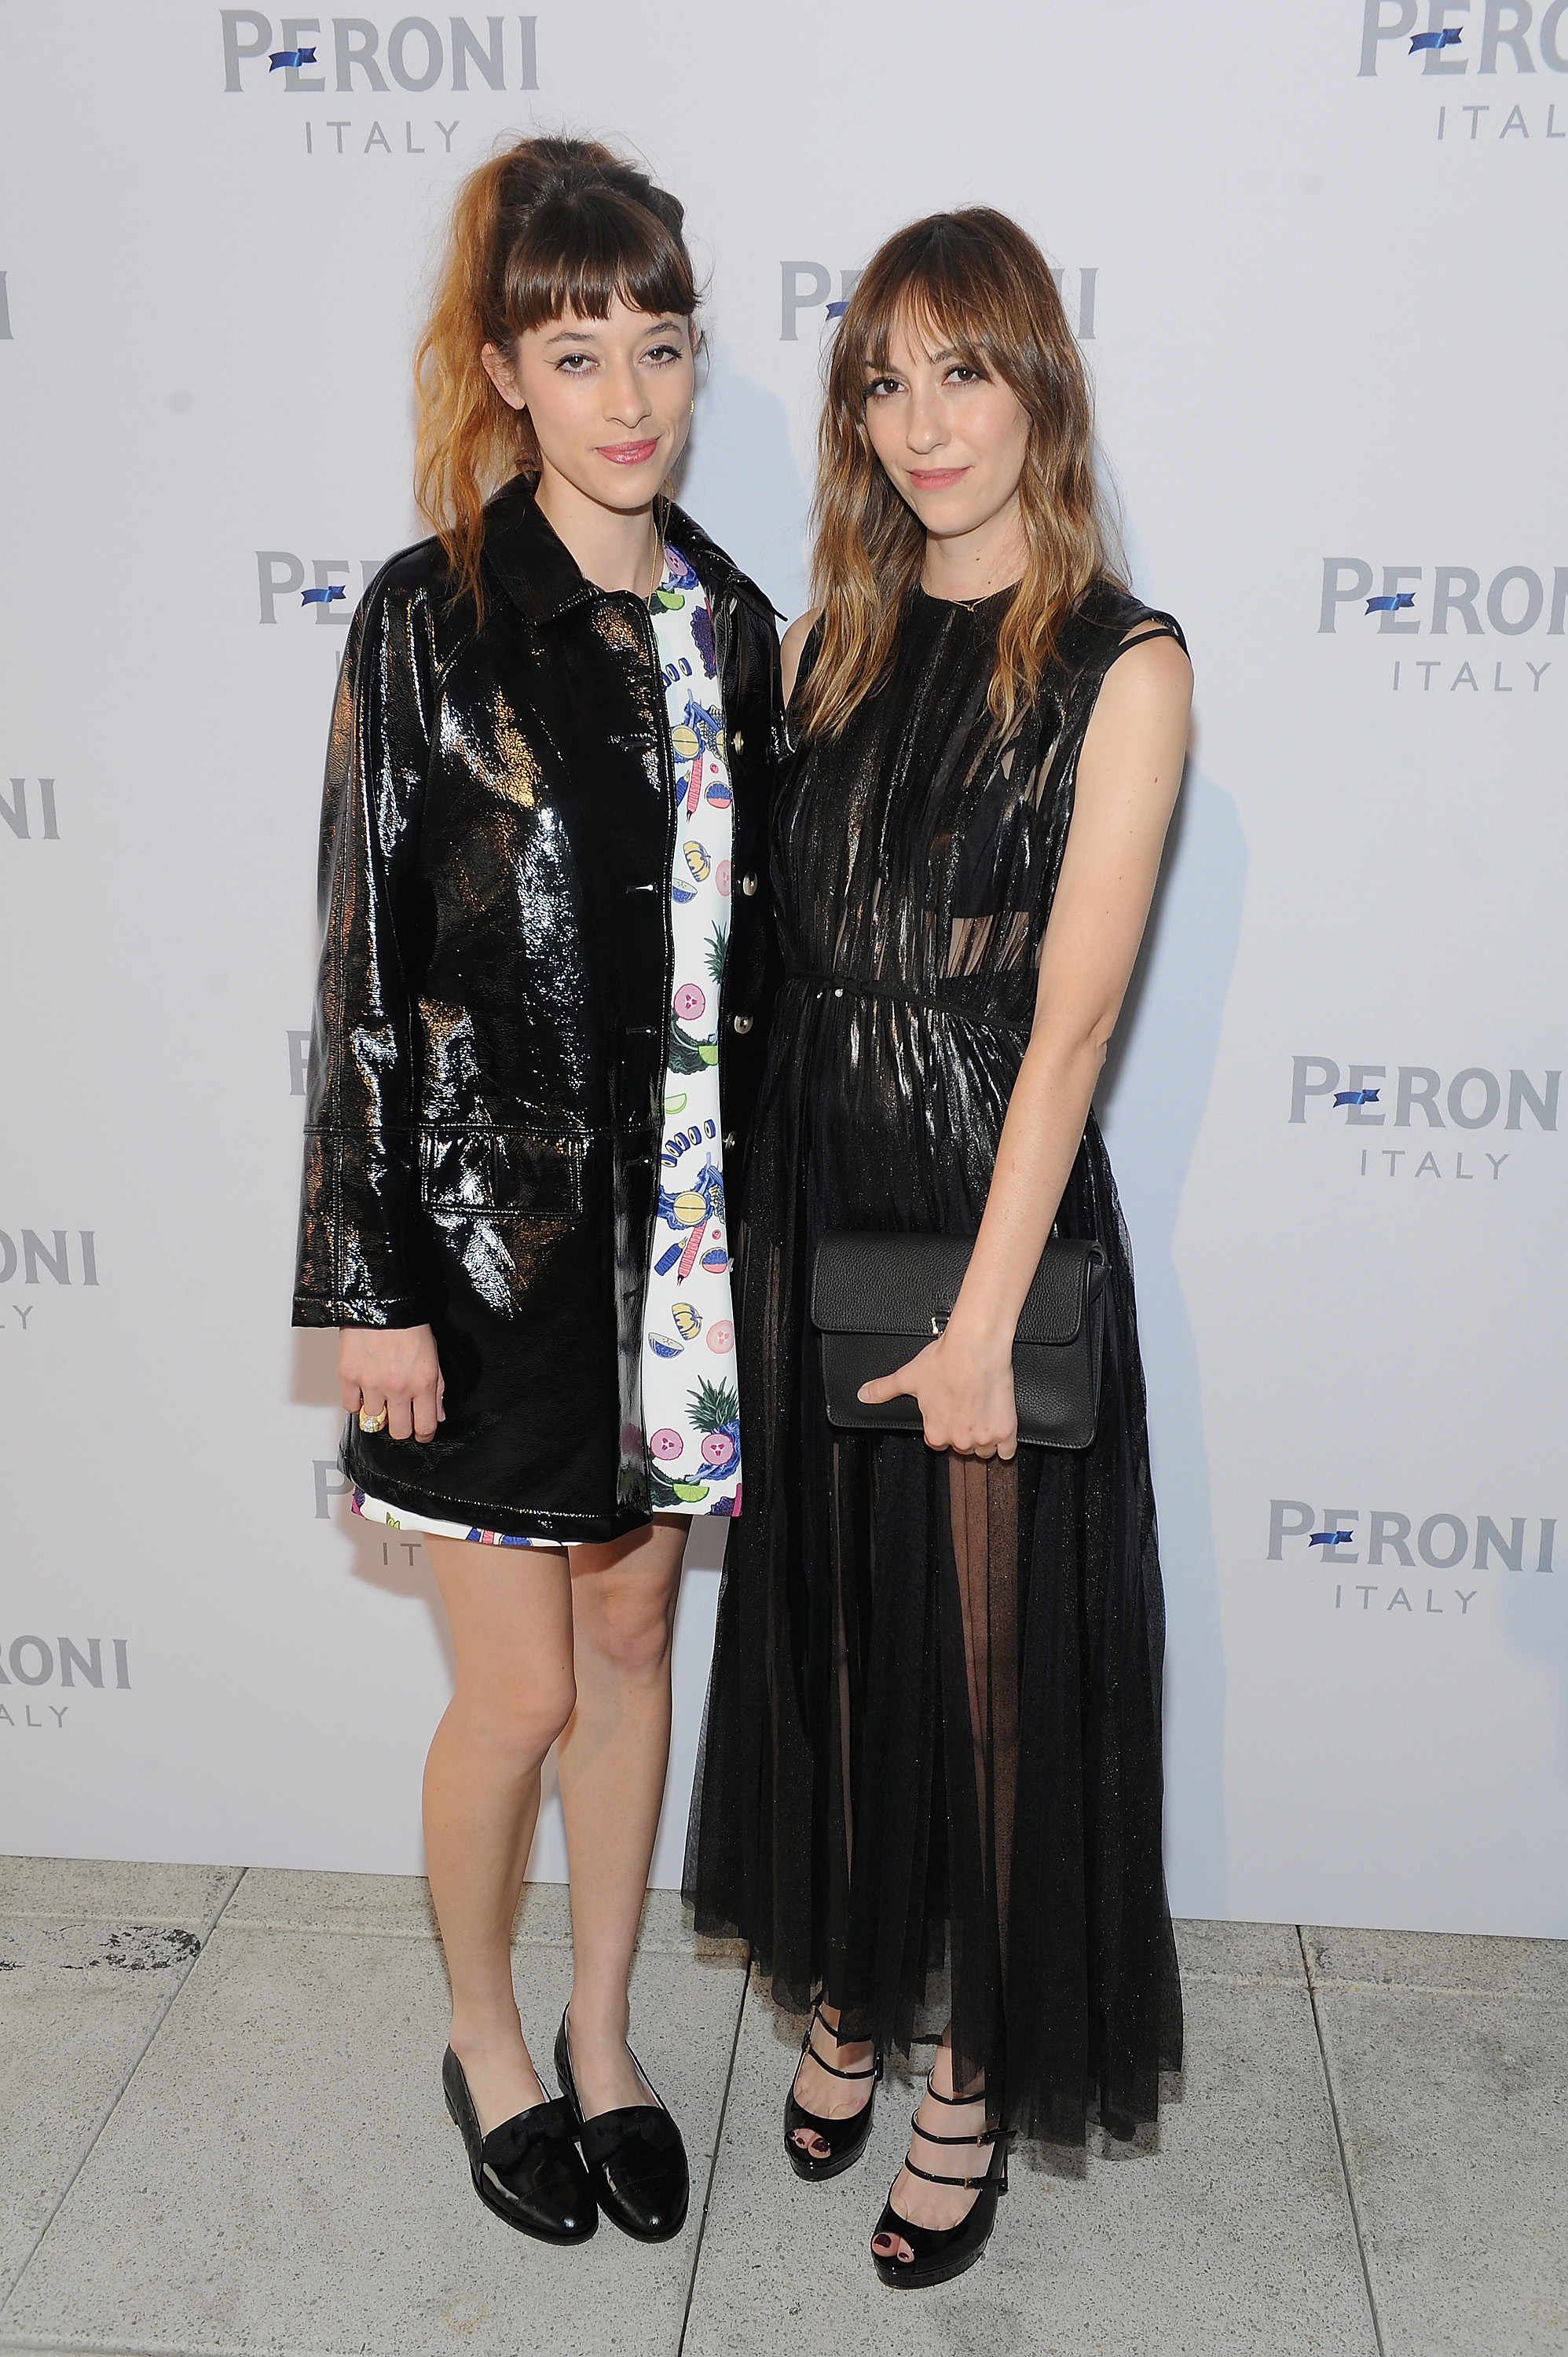 NEW YORK, NY - JUNE 09:  Tracy Antonopoulos and Gia Coppola attend Peroni Nastro Azzurro and Gia Coppola Celebrate Grazie Cinema Series at Hudson Hotel on June 9, 2015 in New York City.  (Photo by Craig Barritt/Getty Images for Peroni Nastro Azzurro)